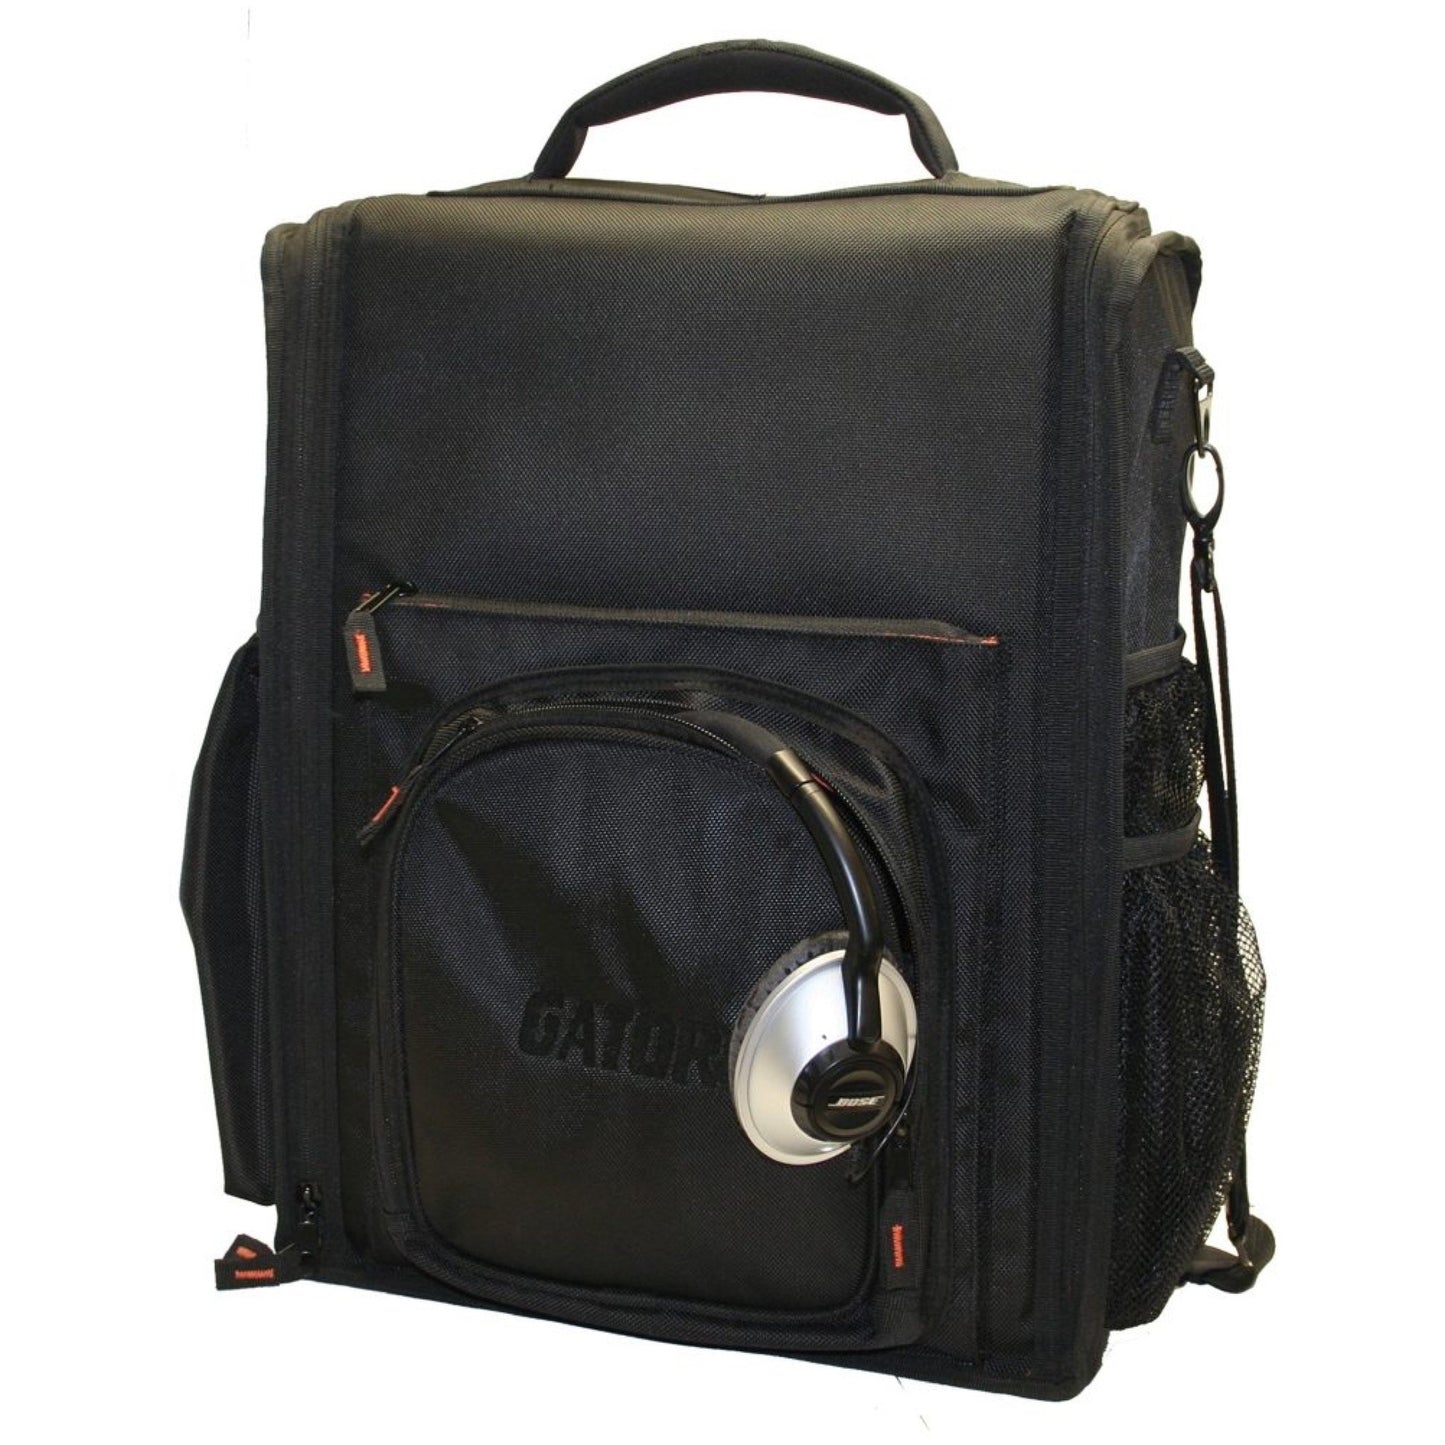 Gator G-CLUB Bag for DJ Mixers/CD Players, GCLUBCDMX12, For Large Players